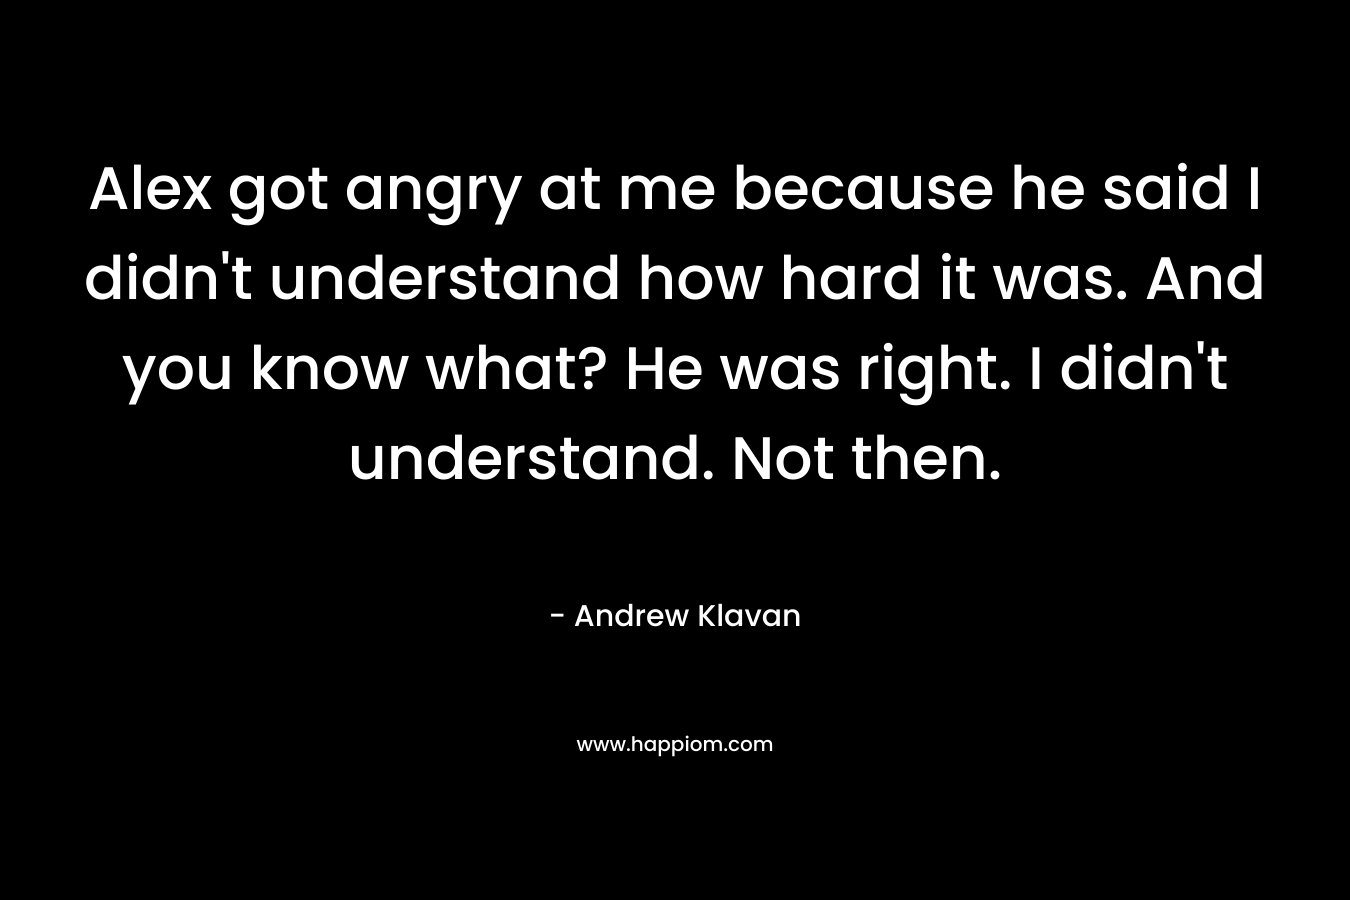 Alex got angry at me because he said I didn’t understand how hard it was. And you know what? He was right. I didn’t understand. Not then. – Andrew Klavan